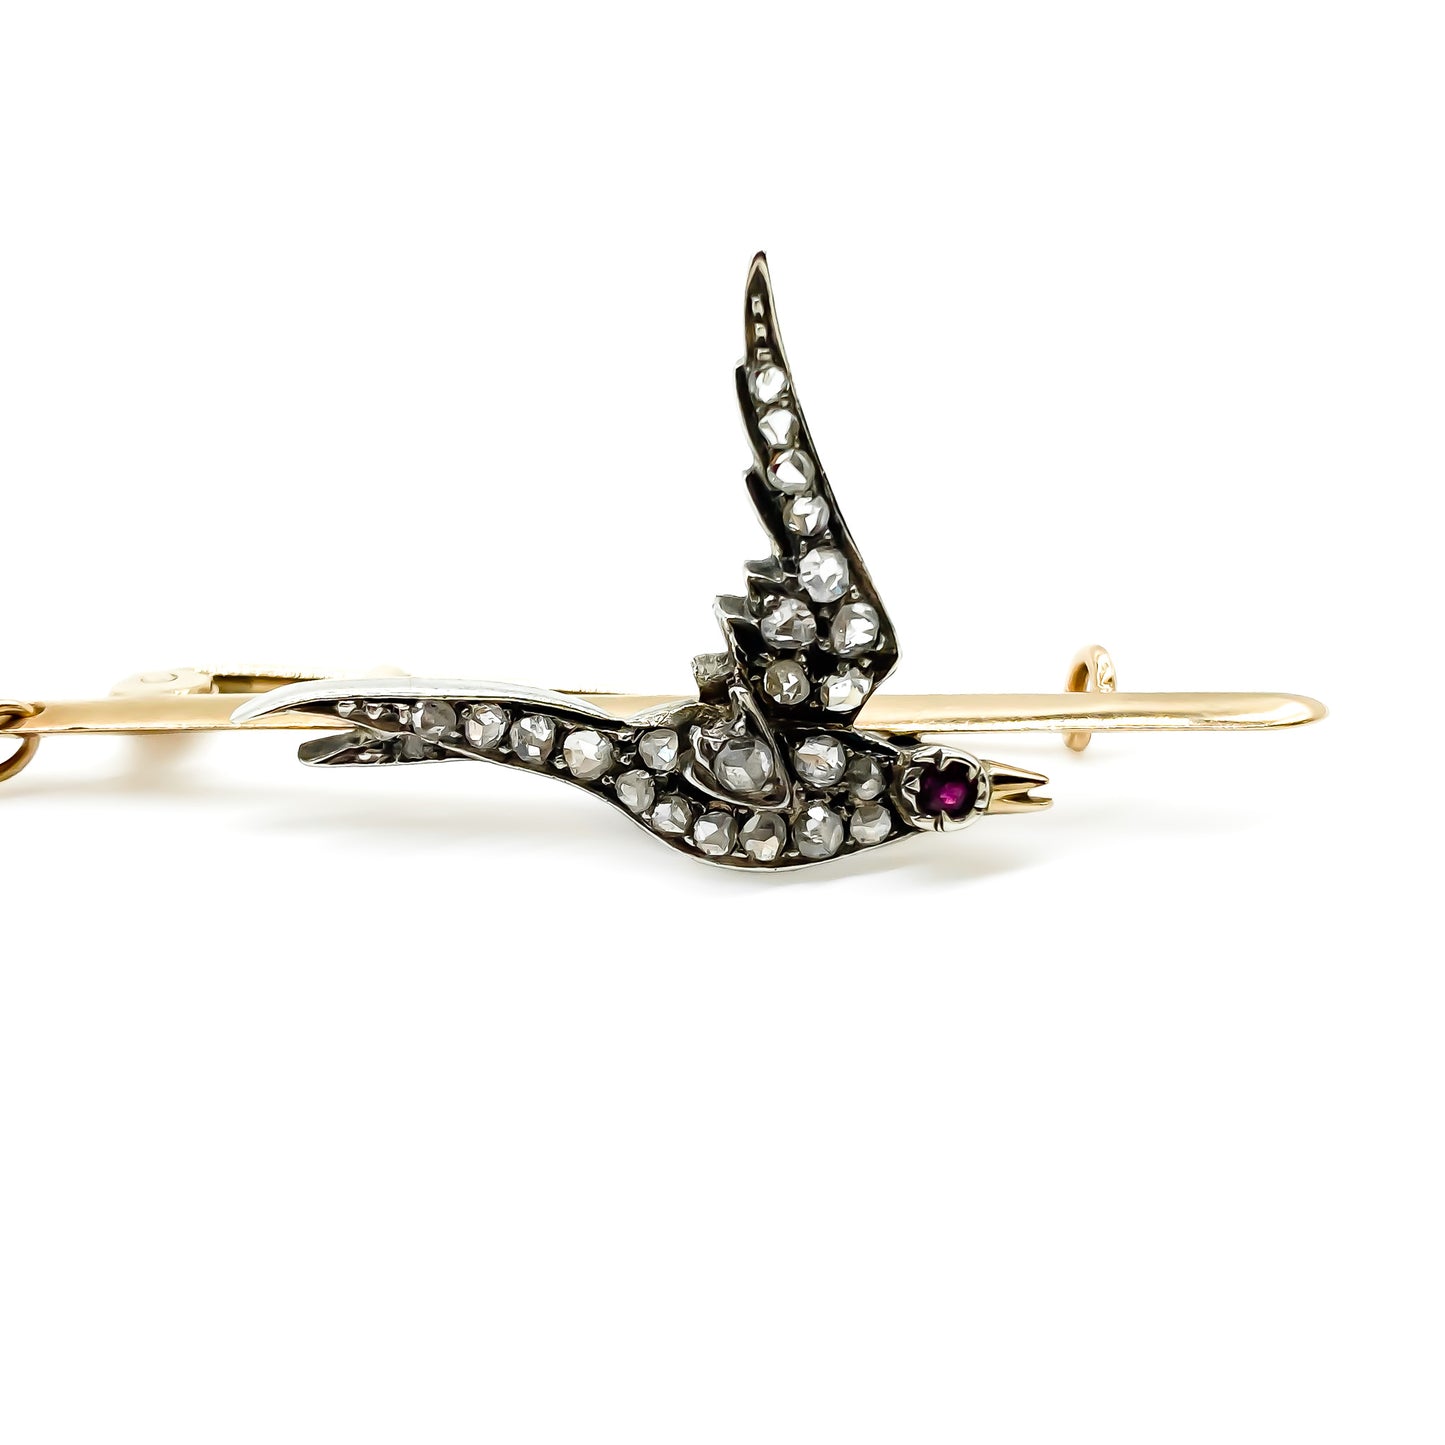 Exquisite Victorian 15ct rose gold bar brooch depicting a bird, set with twenty-three mine cut diamonds and a ruby eye. Gold safety chain attached.